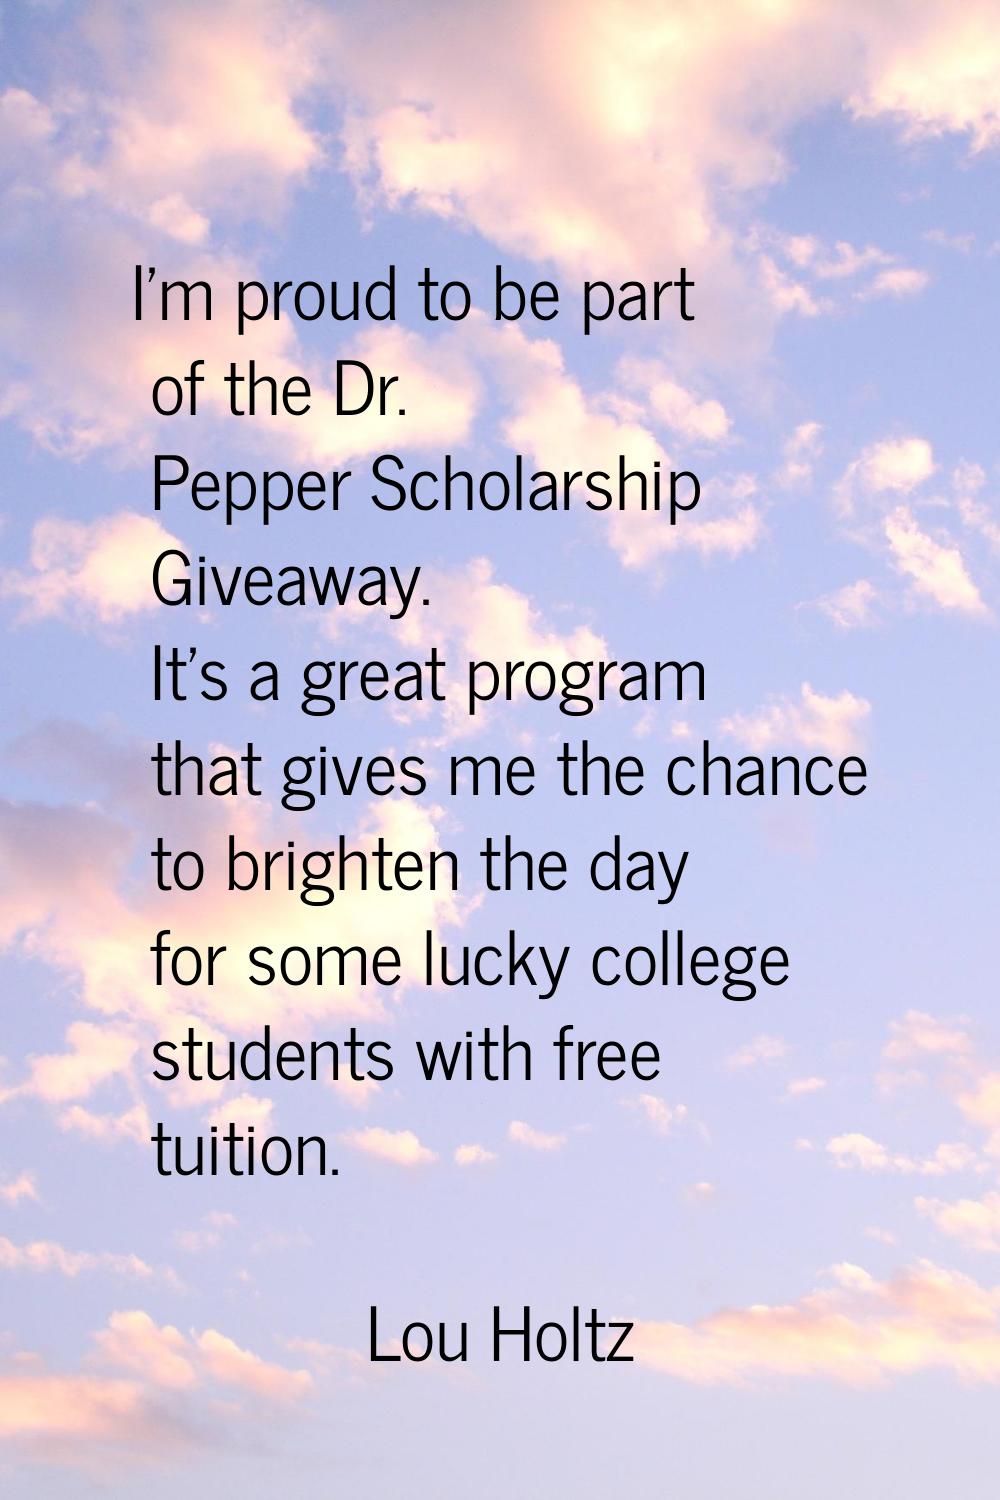 I'm proud to be part of the Dr. Pepper Scholarship Giveaway. It's a great program that gives me the